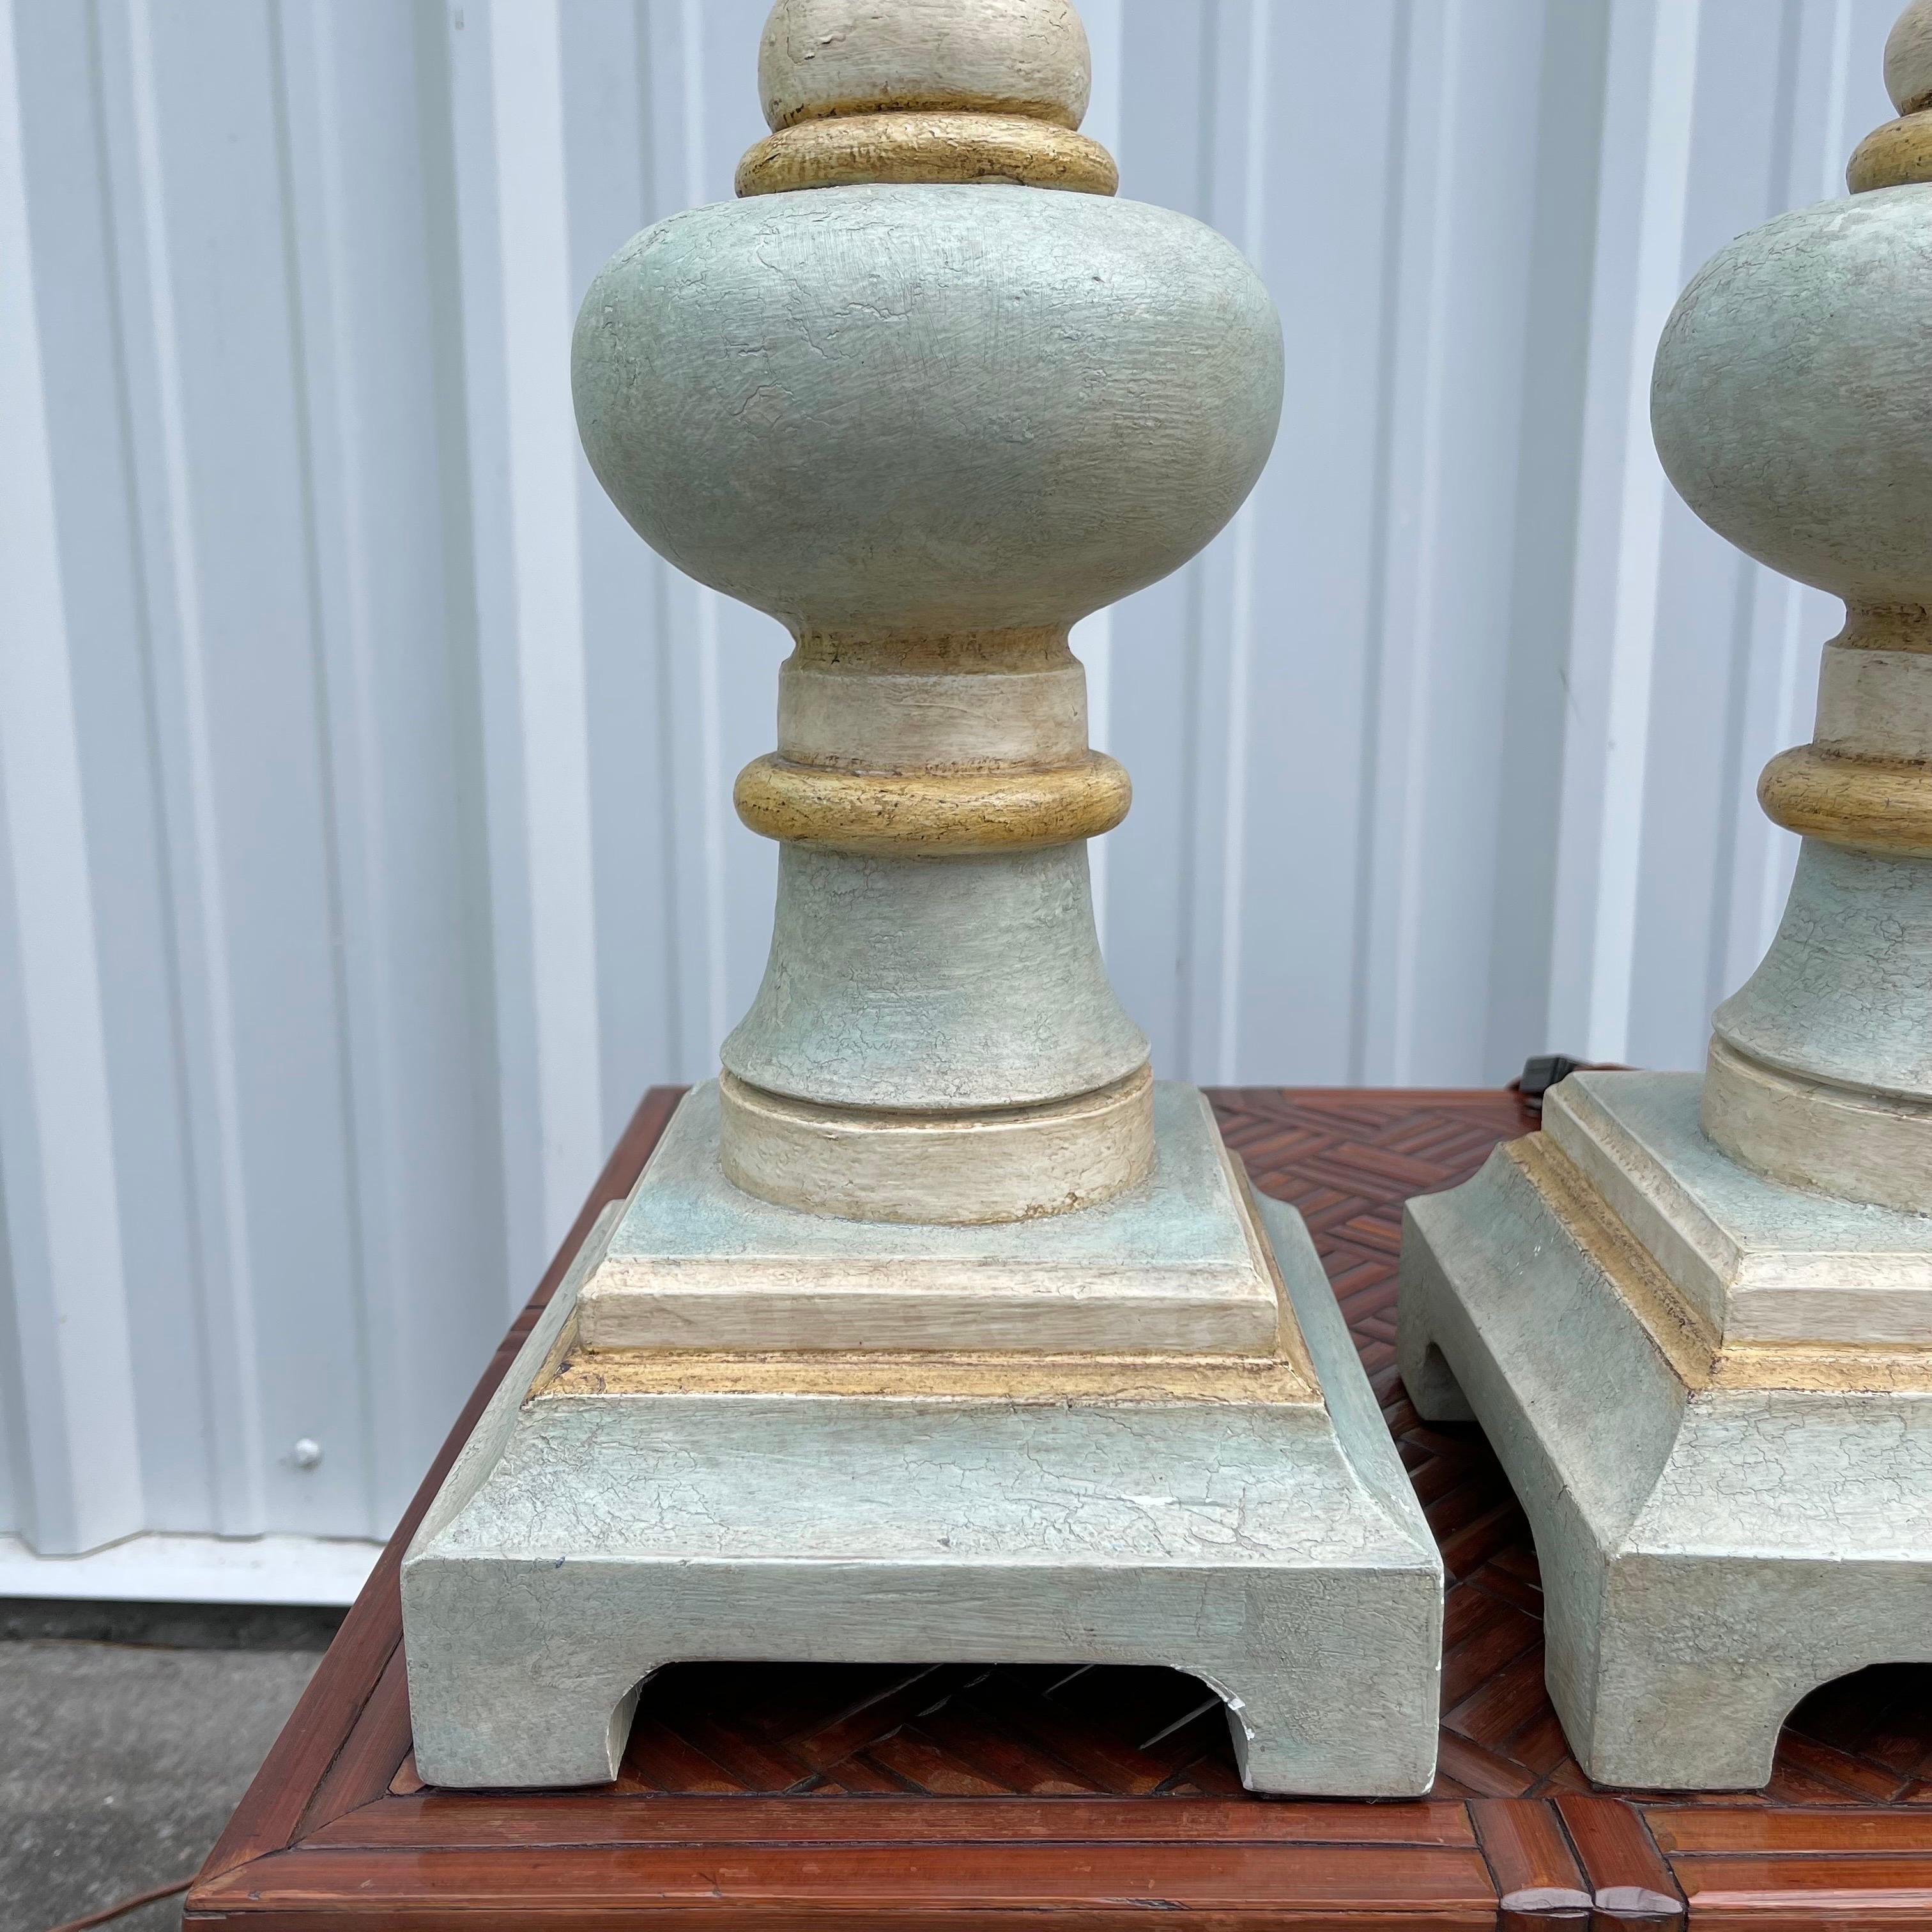 20th Century Hollywood Regency Painted Patinated Carved Wood Bobbin Tables Lamps, a Pair For Sale